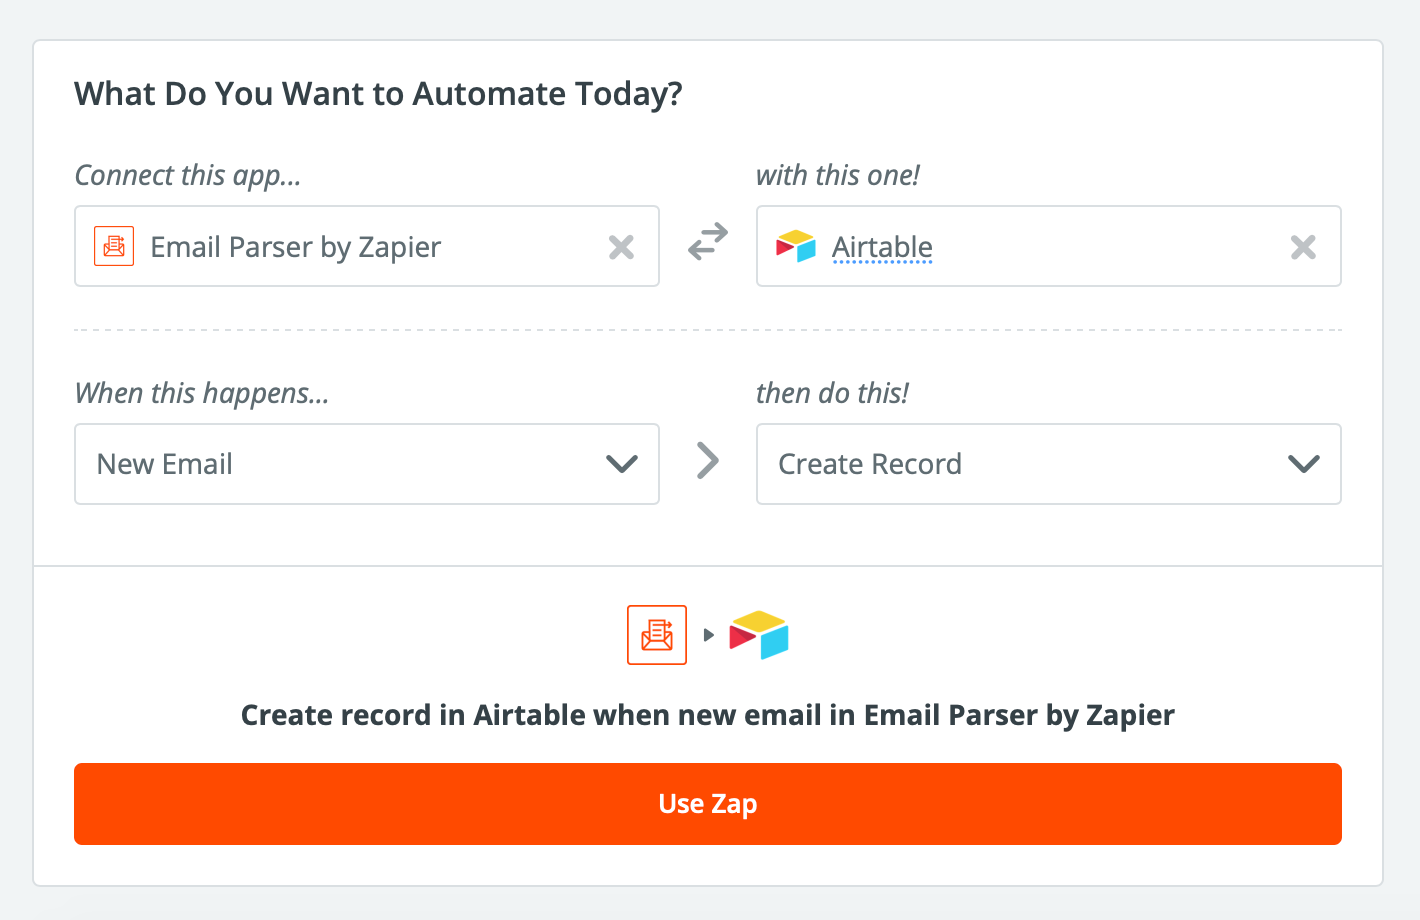 New Zap to create a new Airtable record when an email is parsed